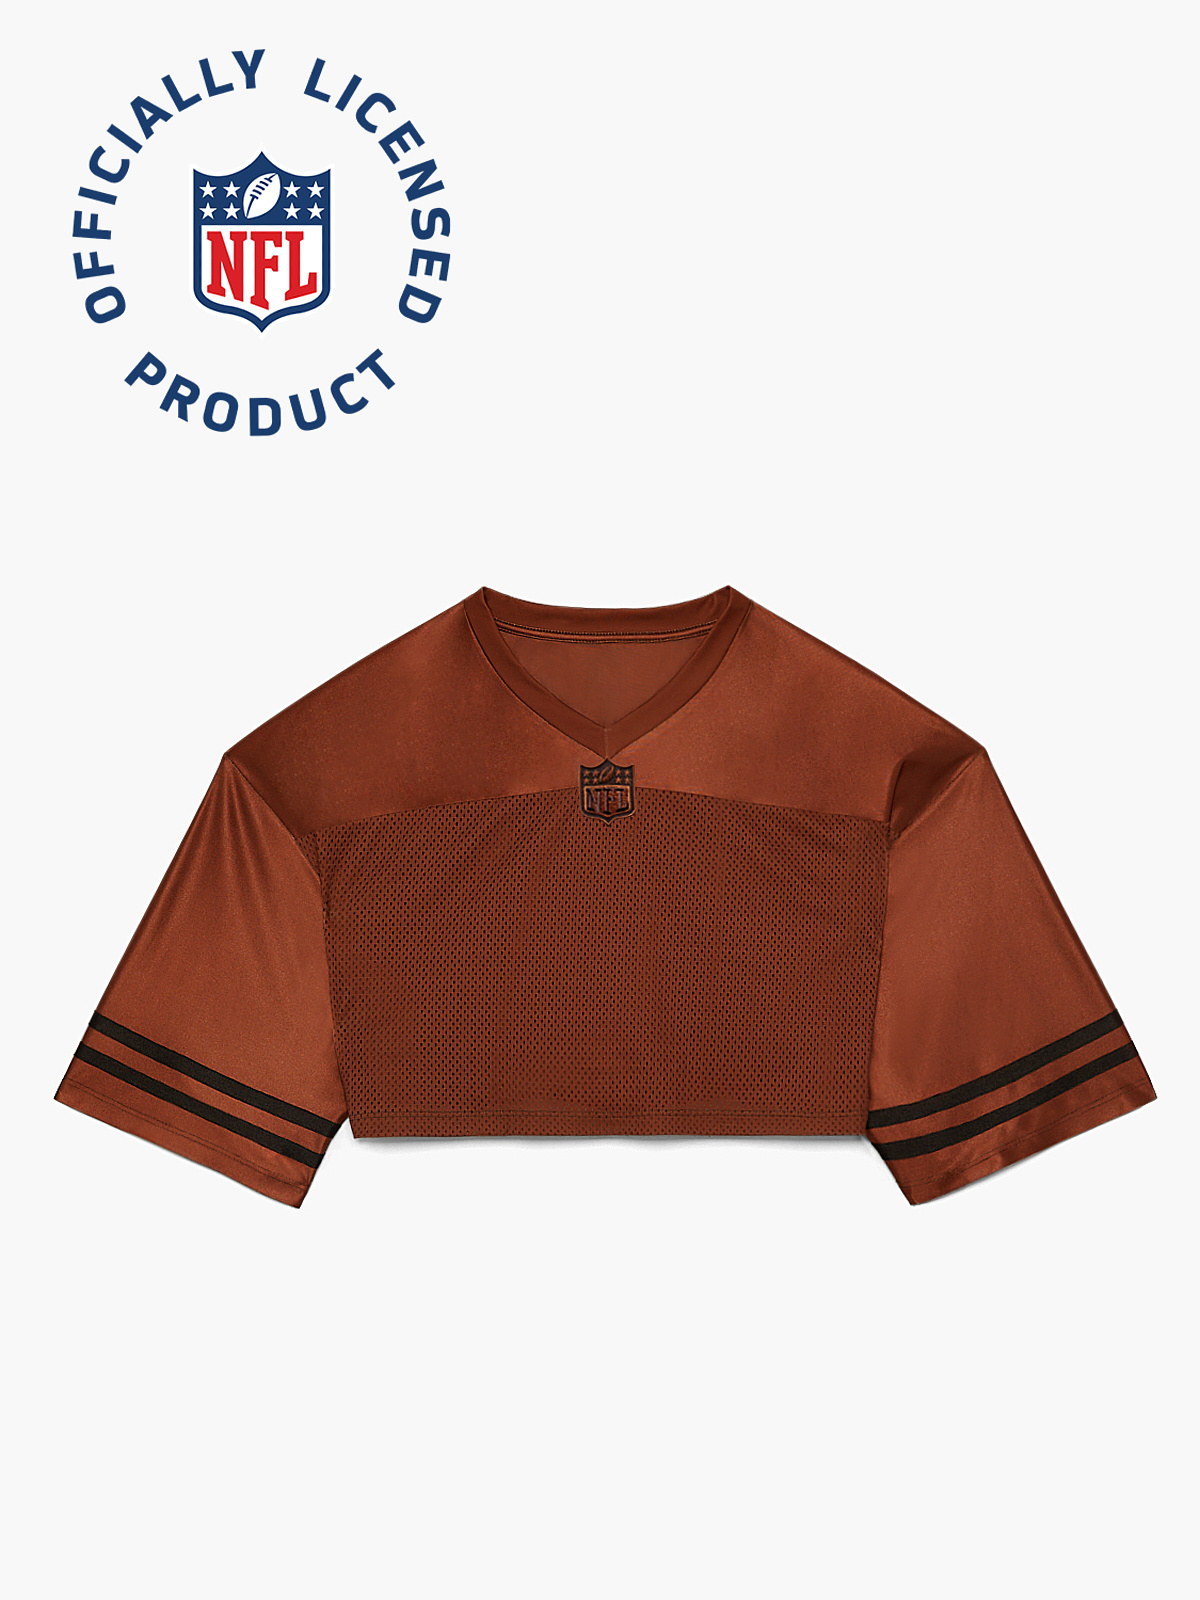 Limited-Edition LVII Cropped Varsity Fashion Jersey with NFL Logo